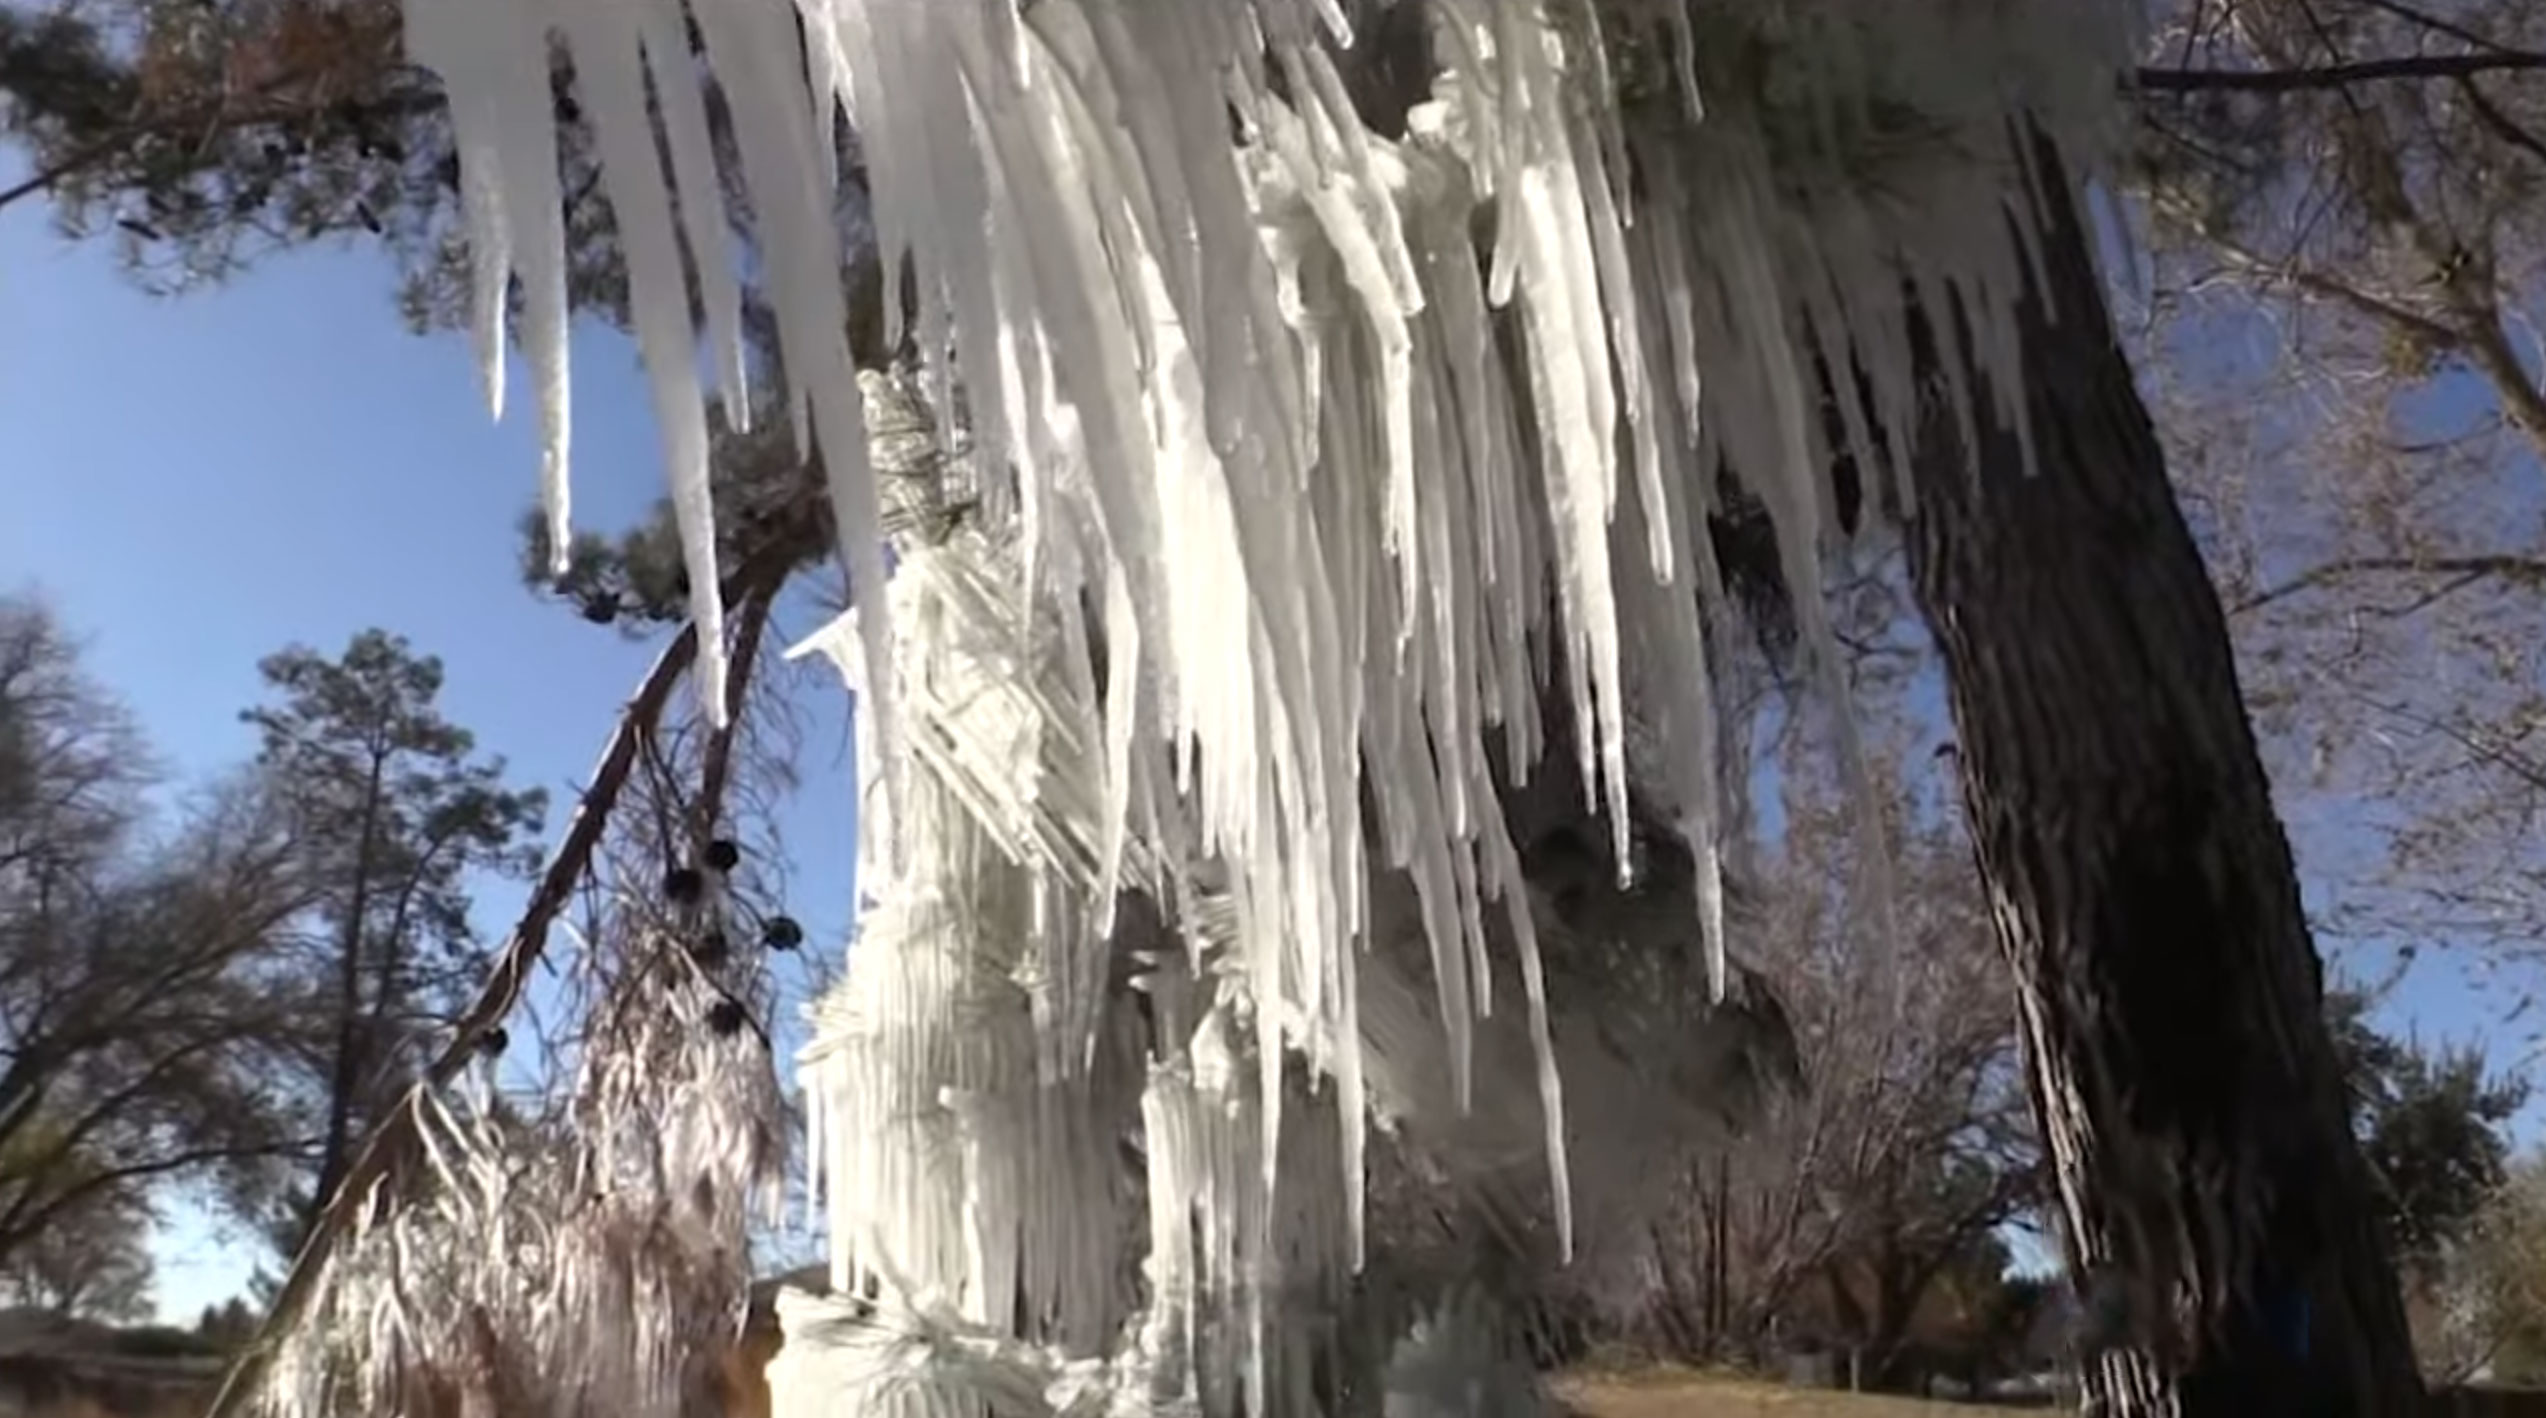 Sprinkler Creates A Frozen Wonderland On This Golf Course After Temperatures Suddenly Drop